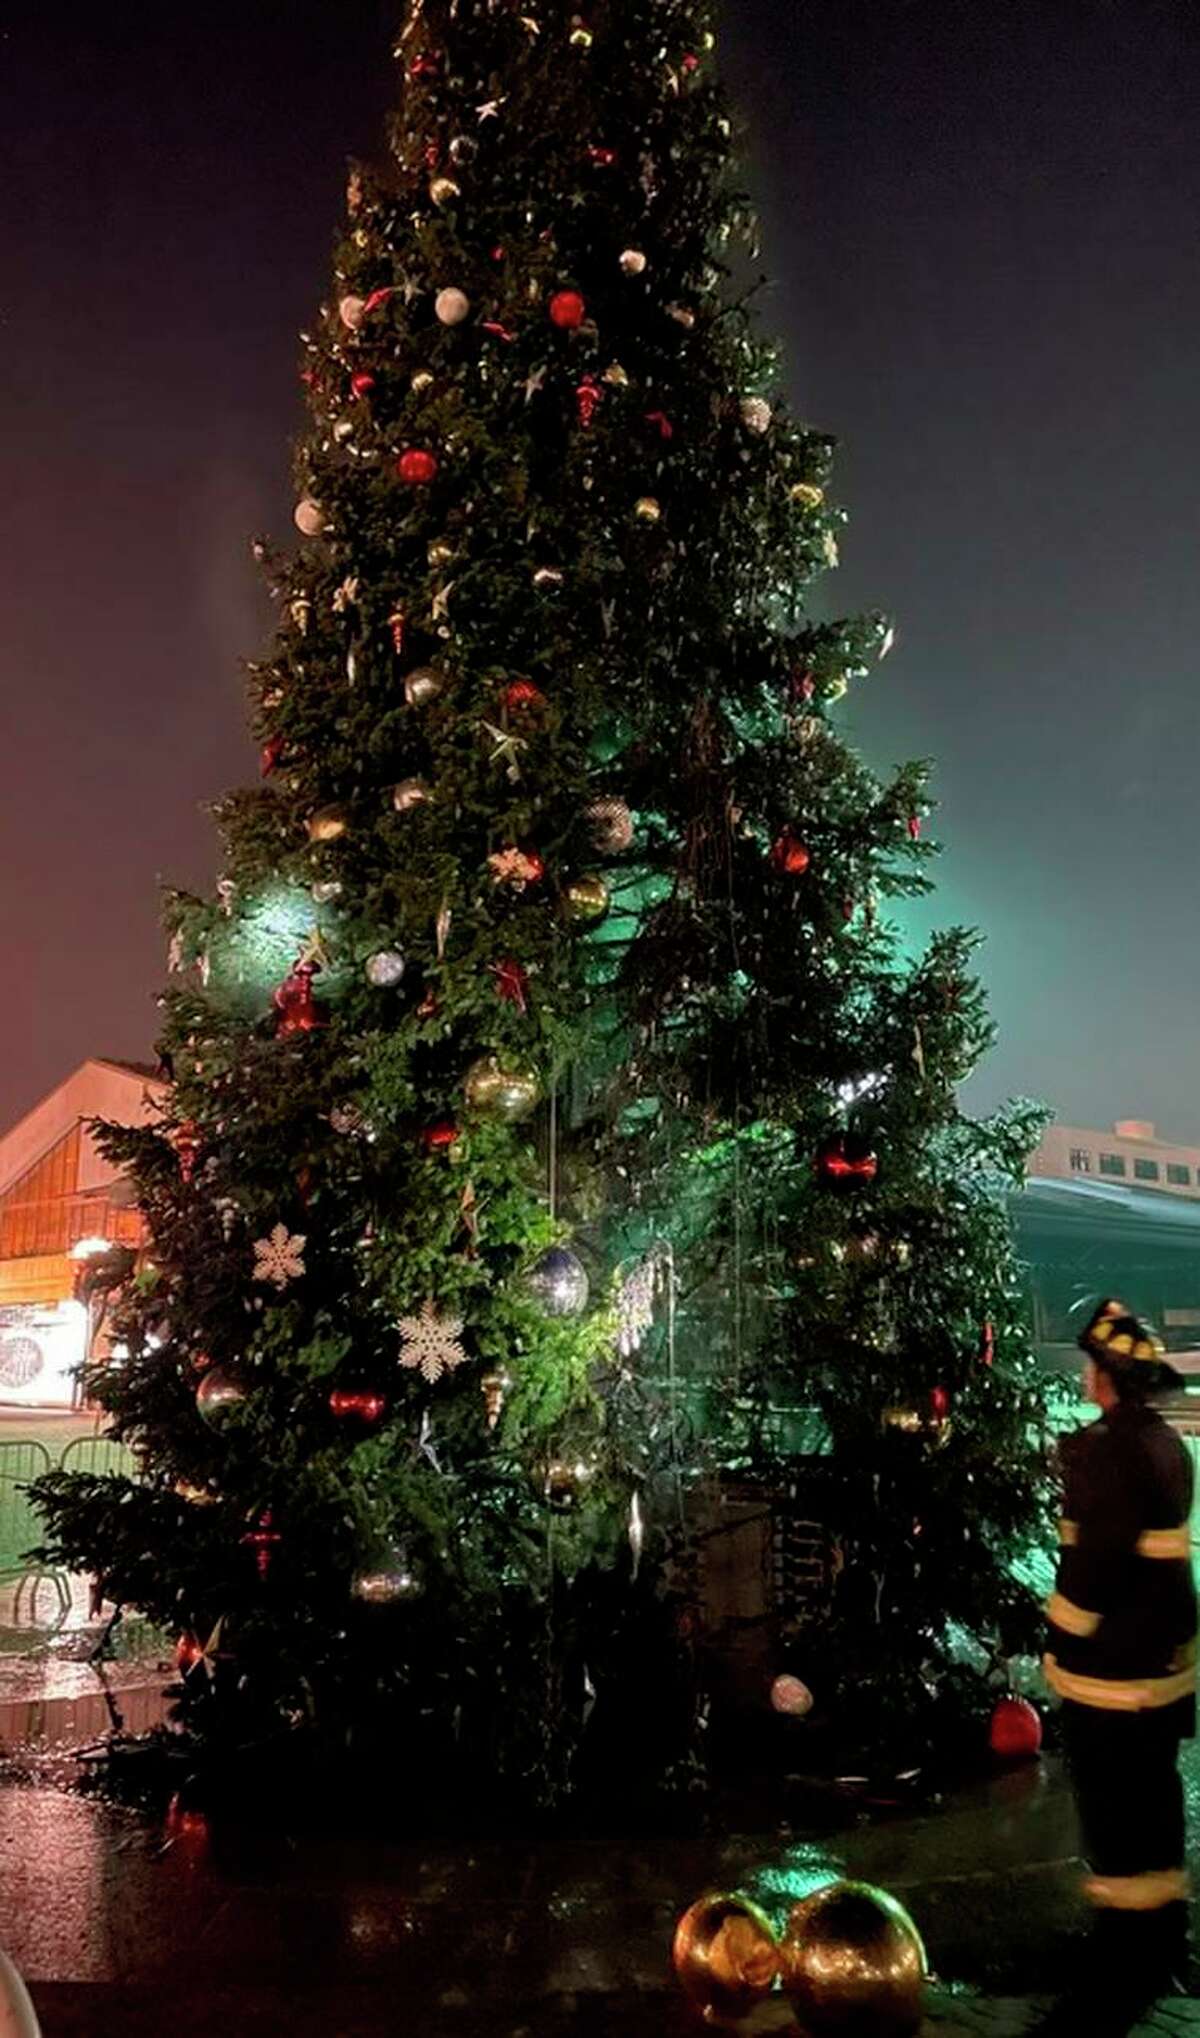 A photograph of the Christmas tree at Oakland’s Jack London Square after firefighters put out a blaze that started early Monday morning. The tree sustained damage but was not considered a total loss.